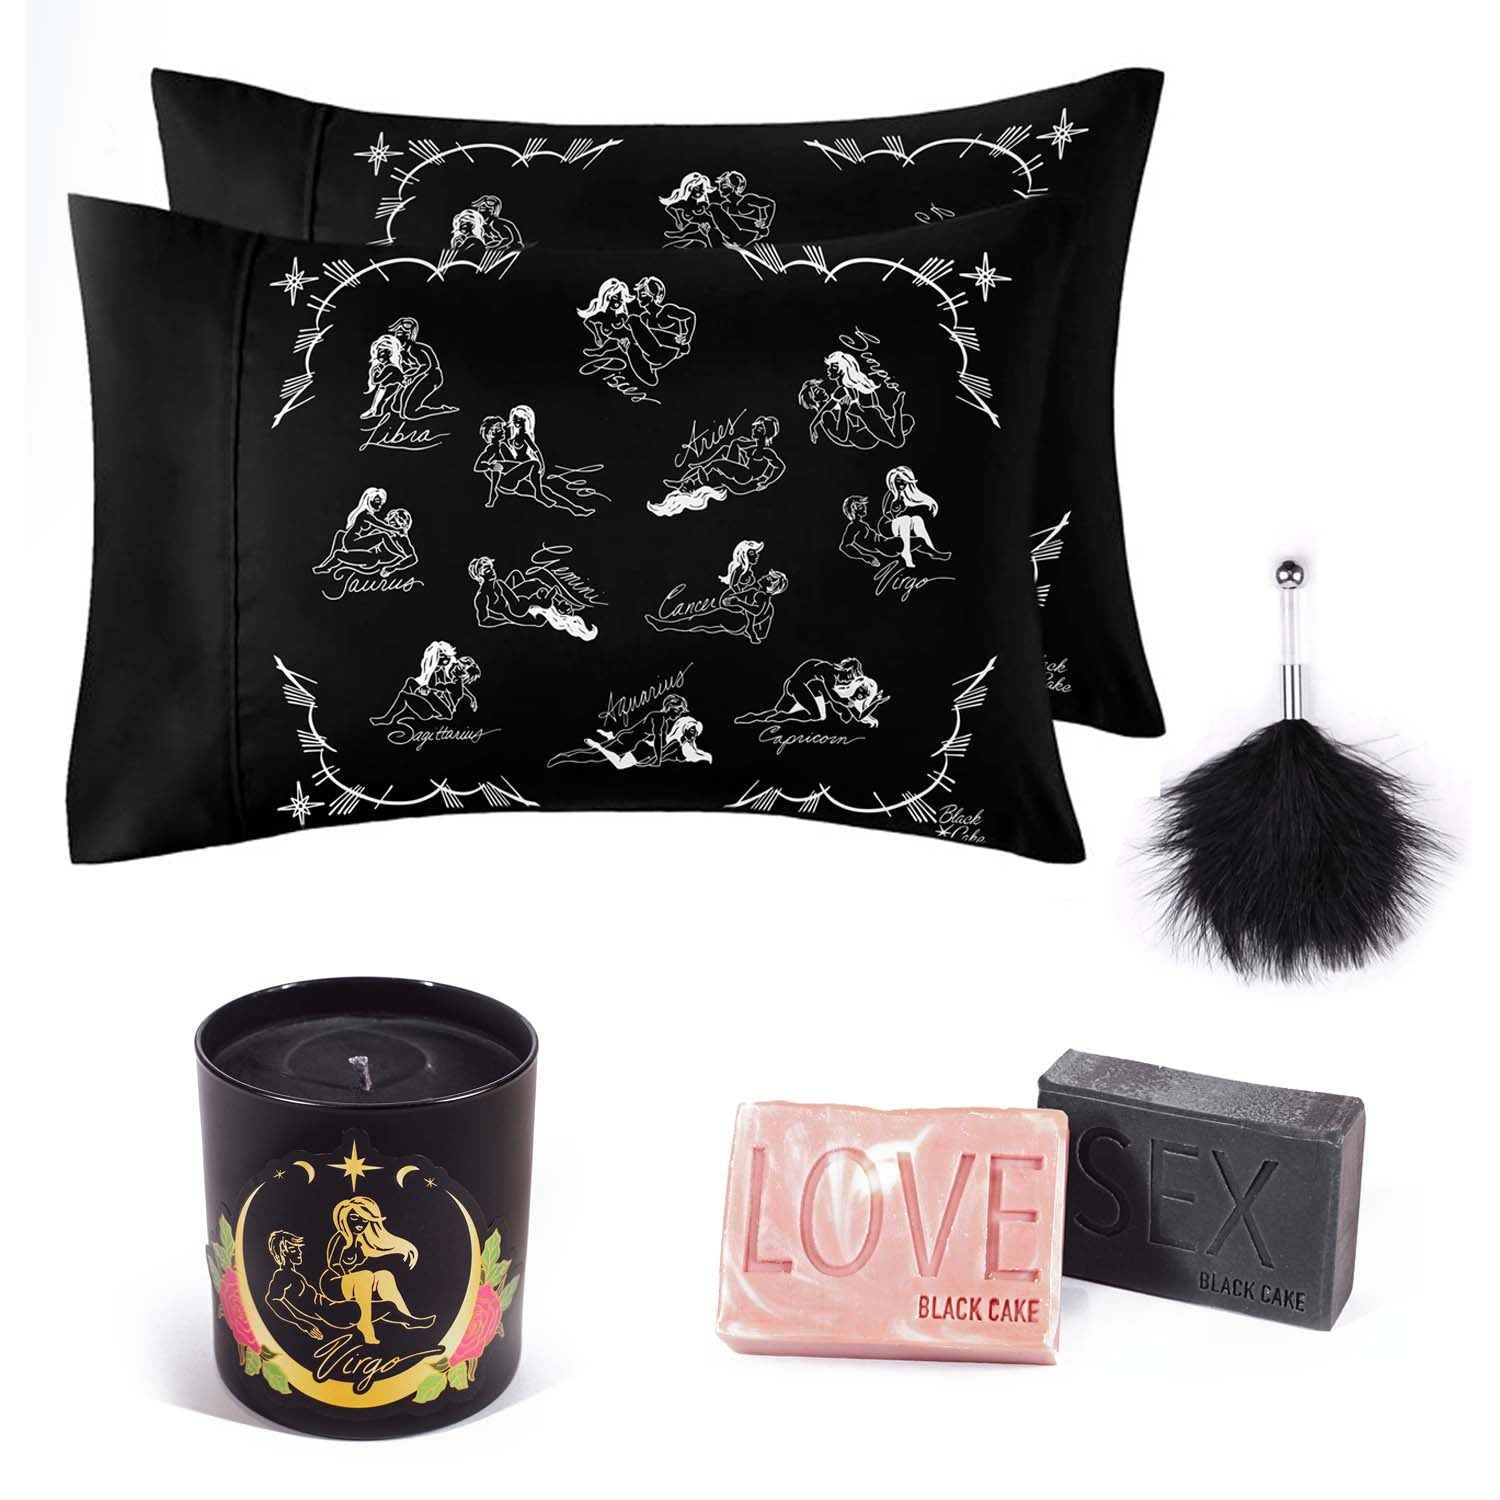 Valentine Day Zodiac Horoscope Love Pillowcase, Soap, Candle Playdate Gift Sets